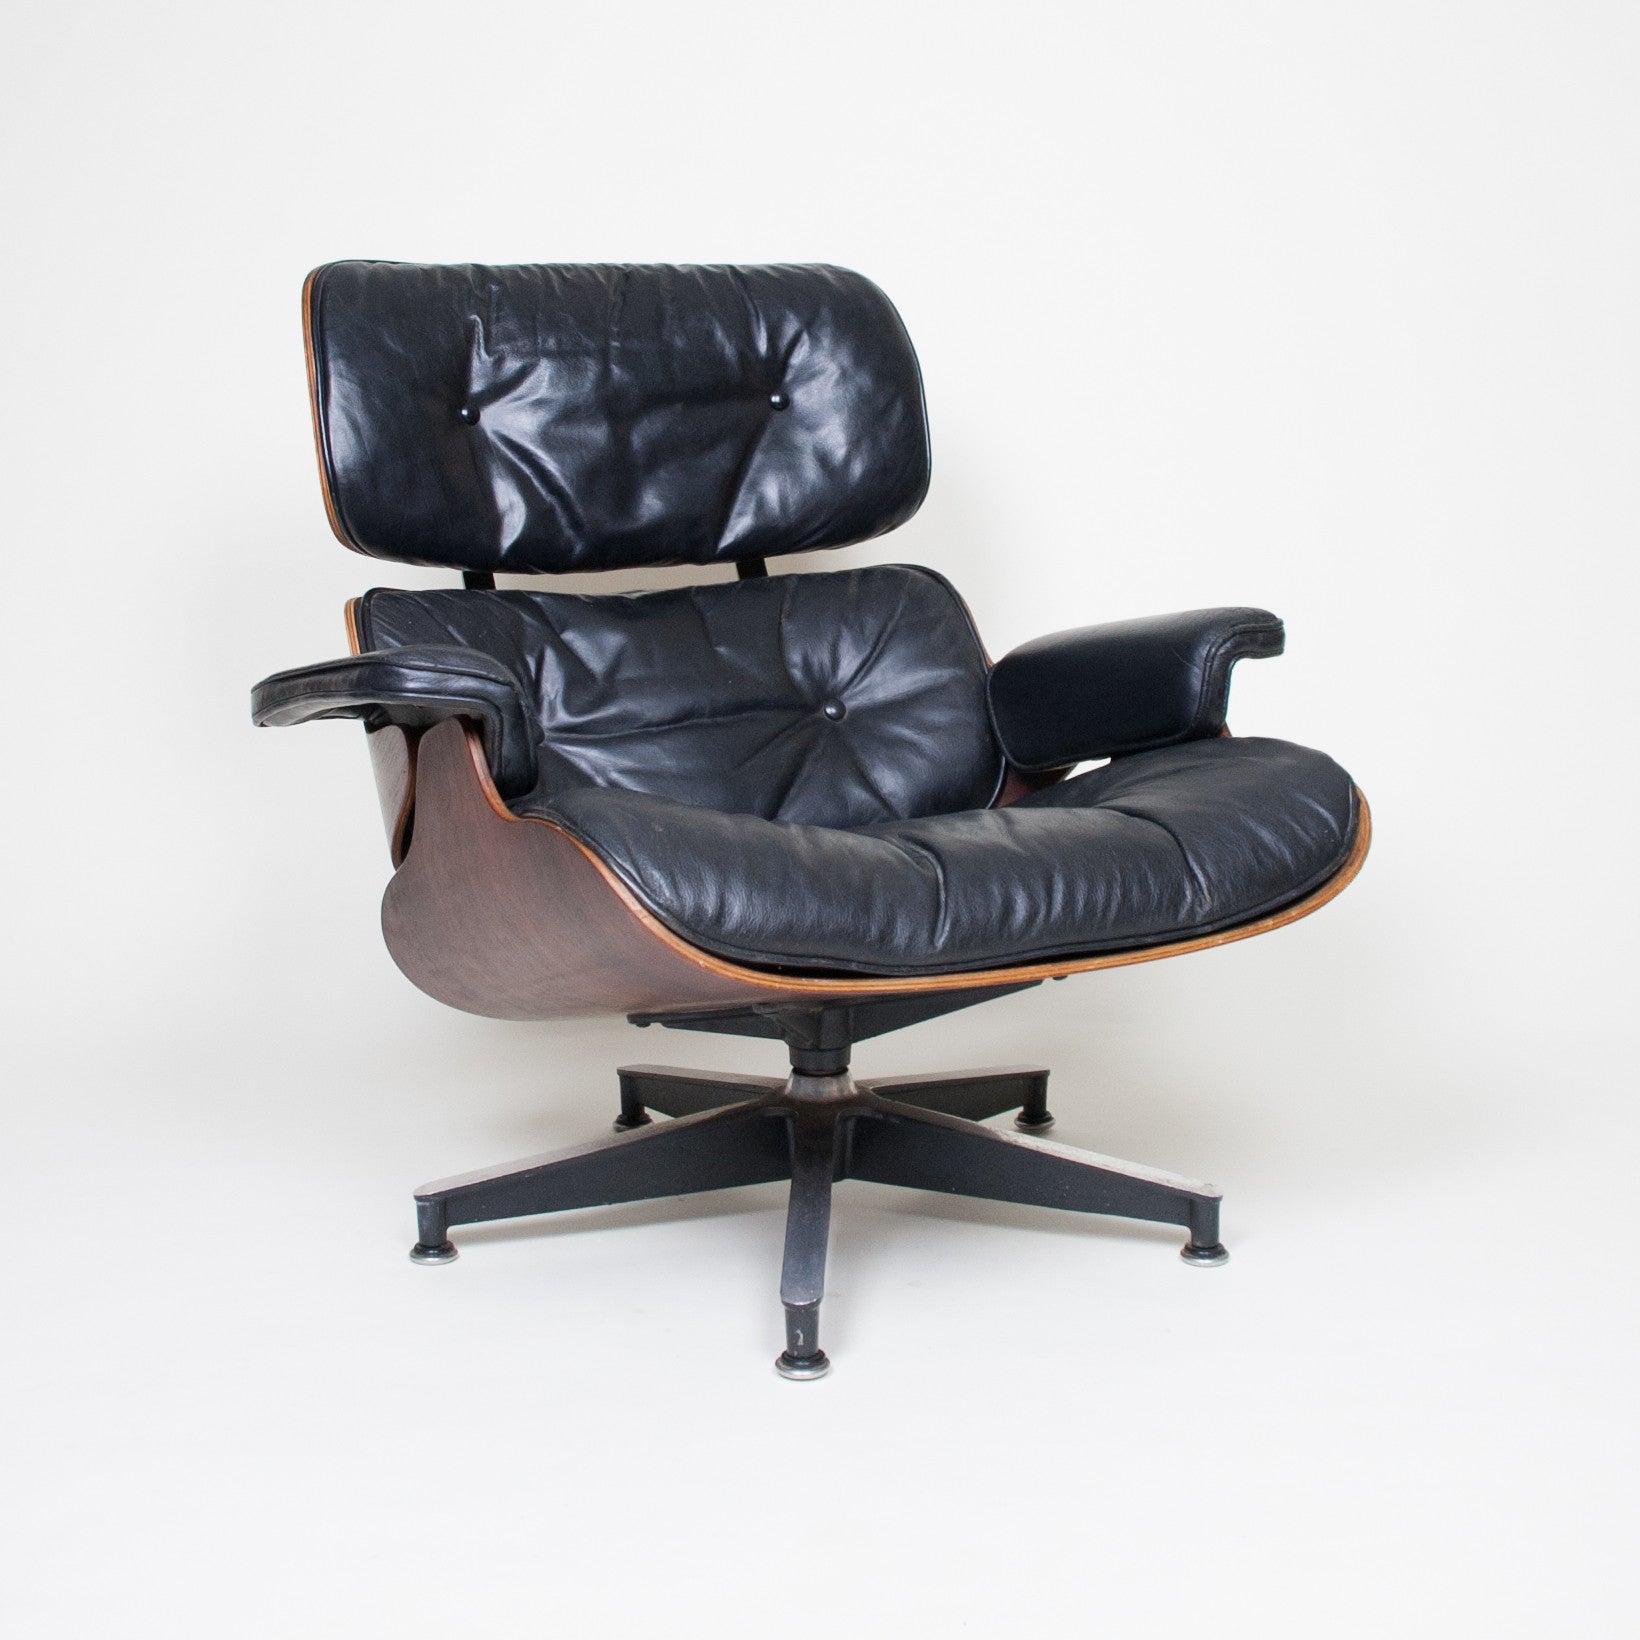 SOLD 1960's Herman Miller Eames Lounge Chair & Ottoman Rosewood 670 671